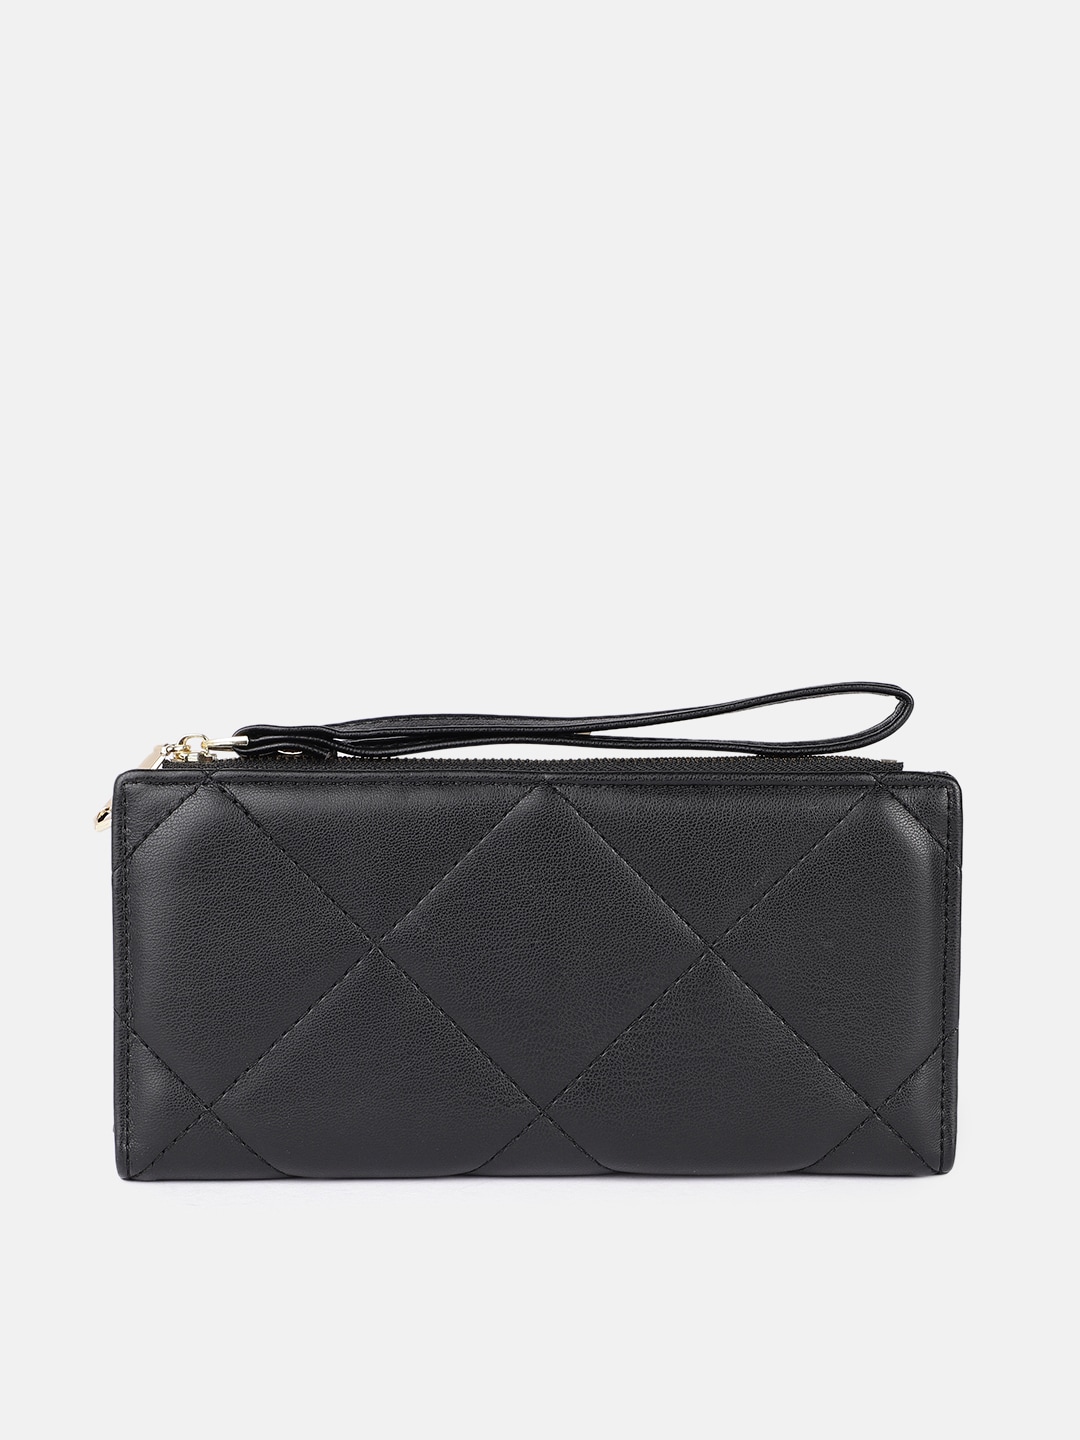 DressBerry Women Black PU Two Fold Wallet Price in India